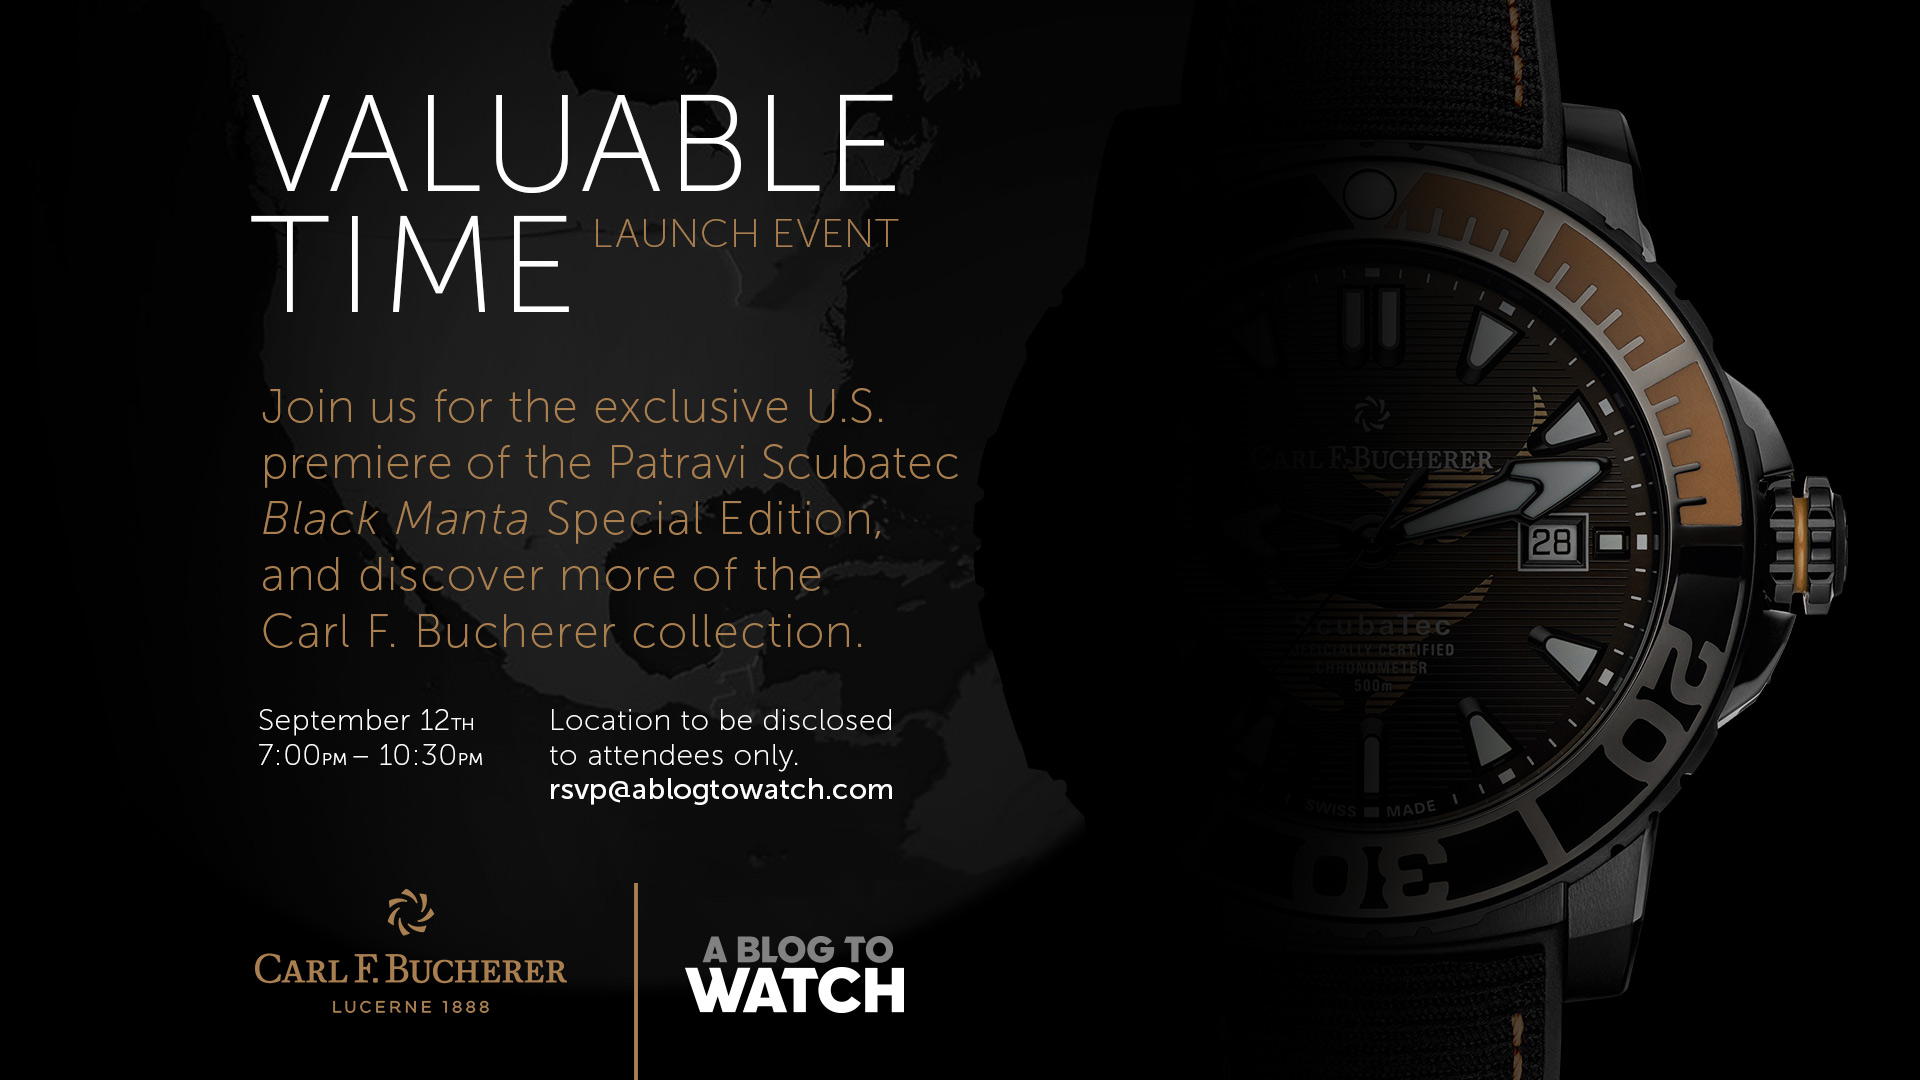 Invitation: An RSVP-Only Los Angeles Event On September 12th With aBlogtoWatch And Carl F. Bucherer